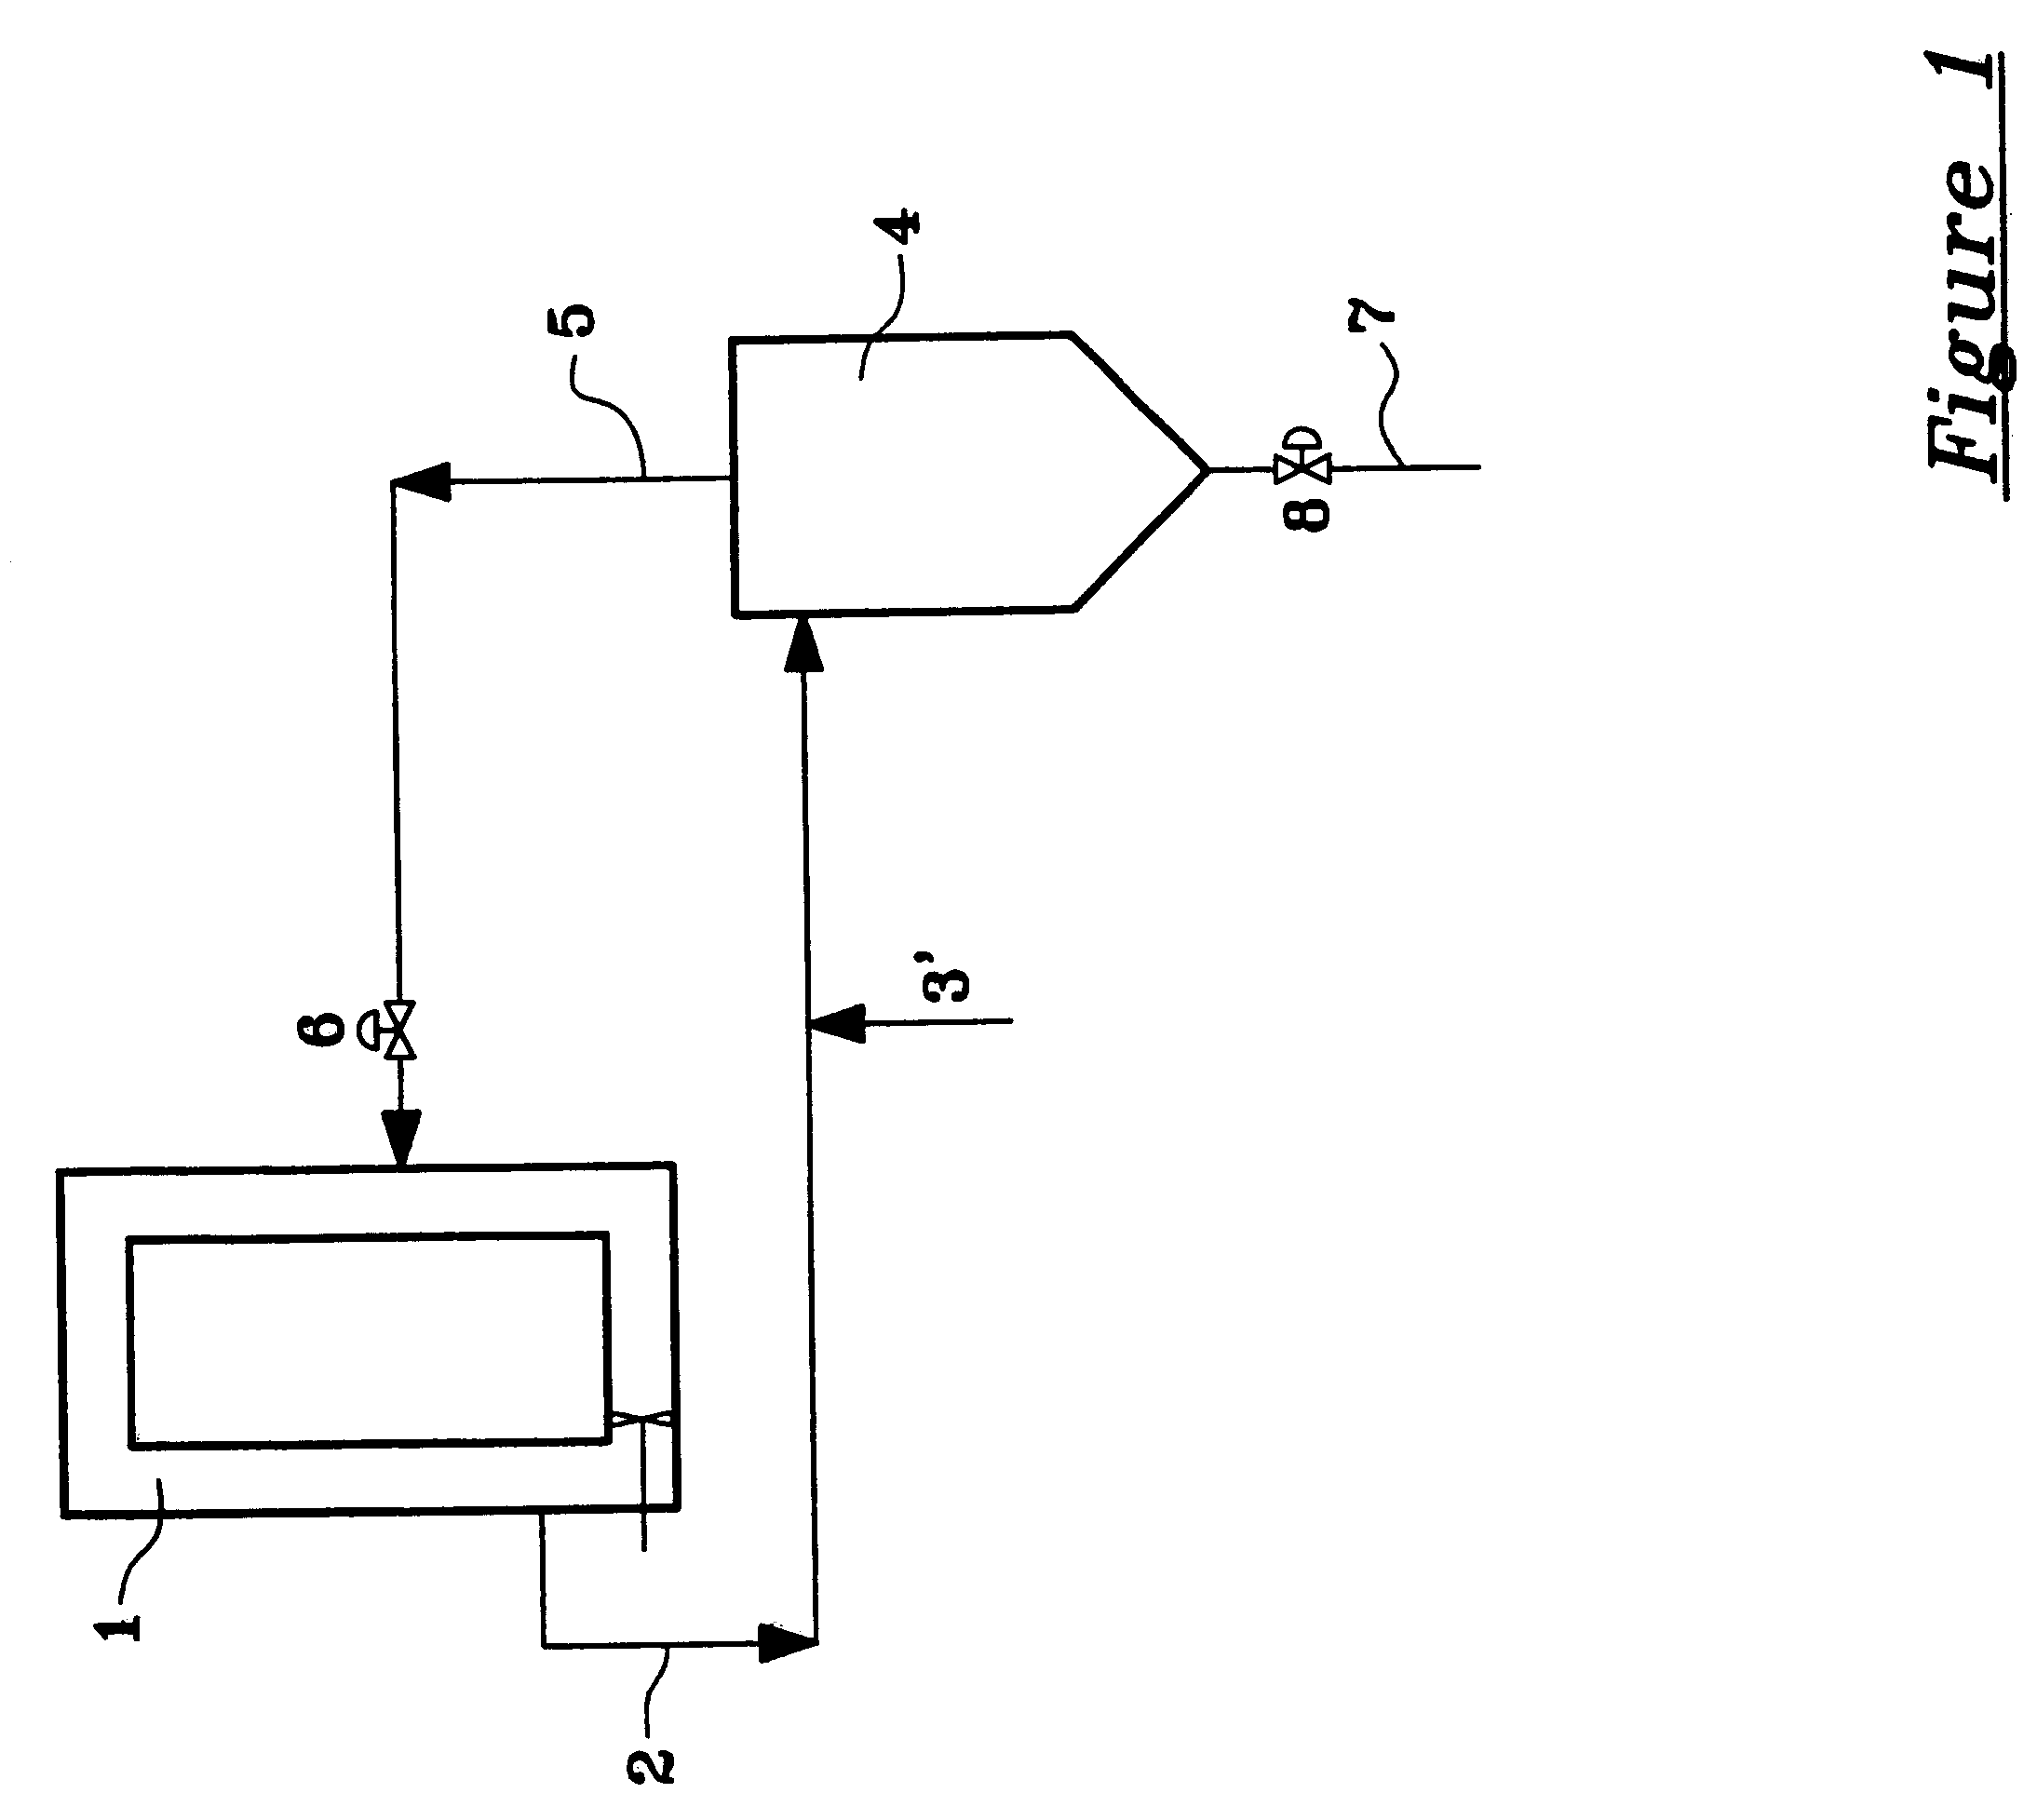 Process for manufacturing olefin polymers